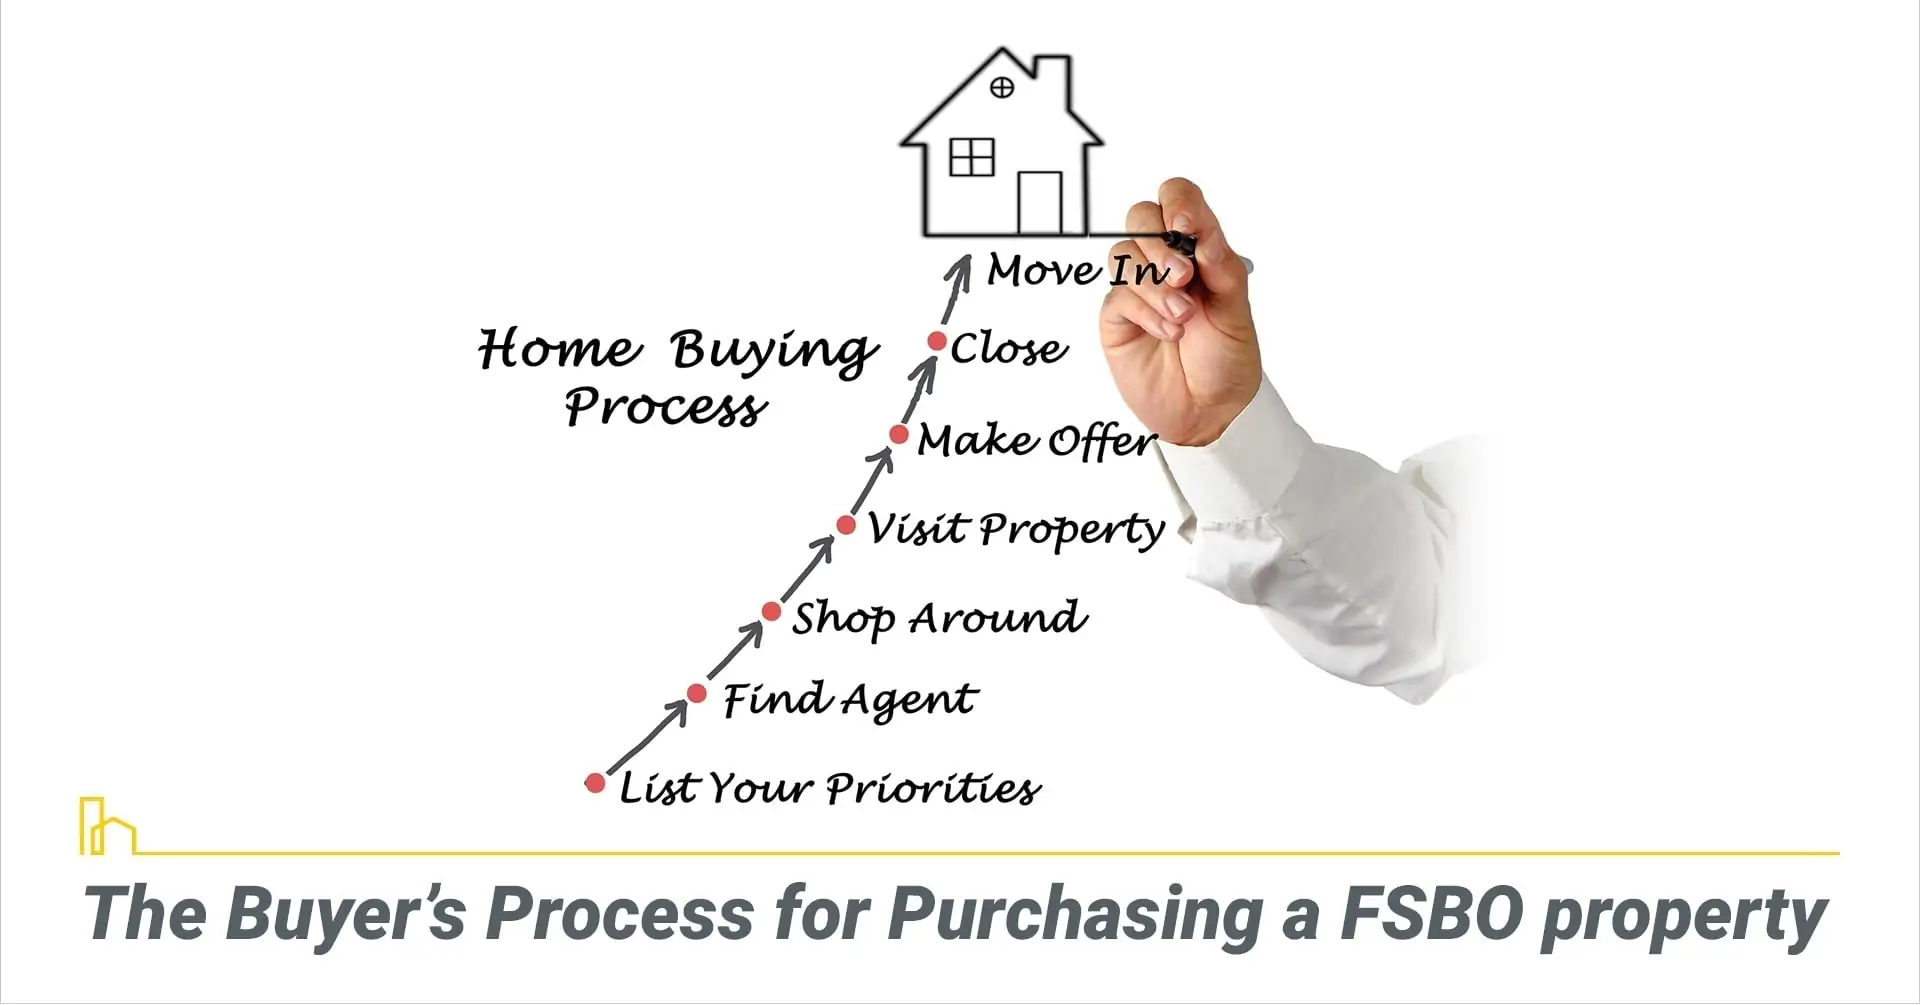 The Buyer’s Process for Purchasing a FSBO property, steps for buying a FSBO home